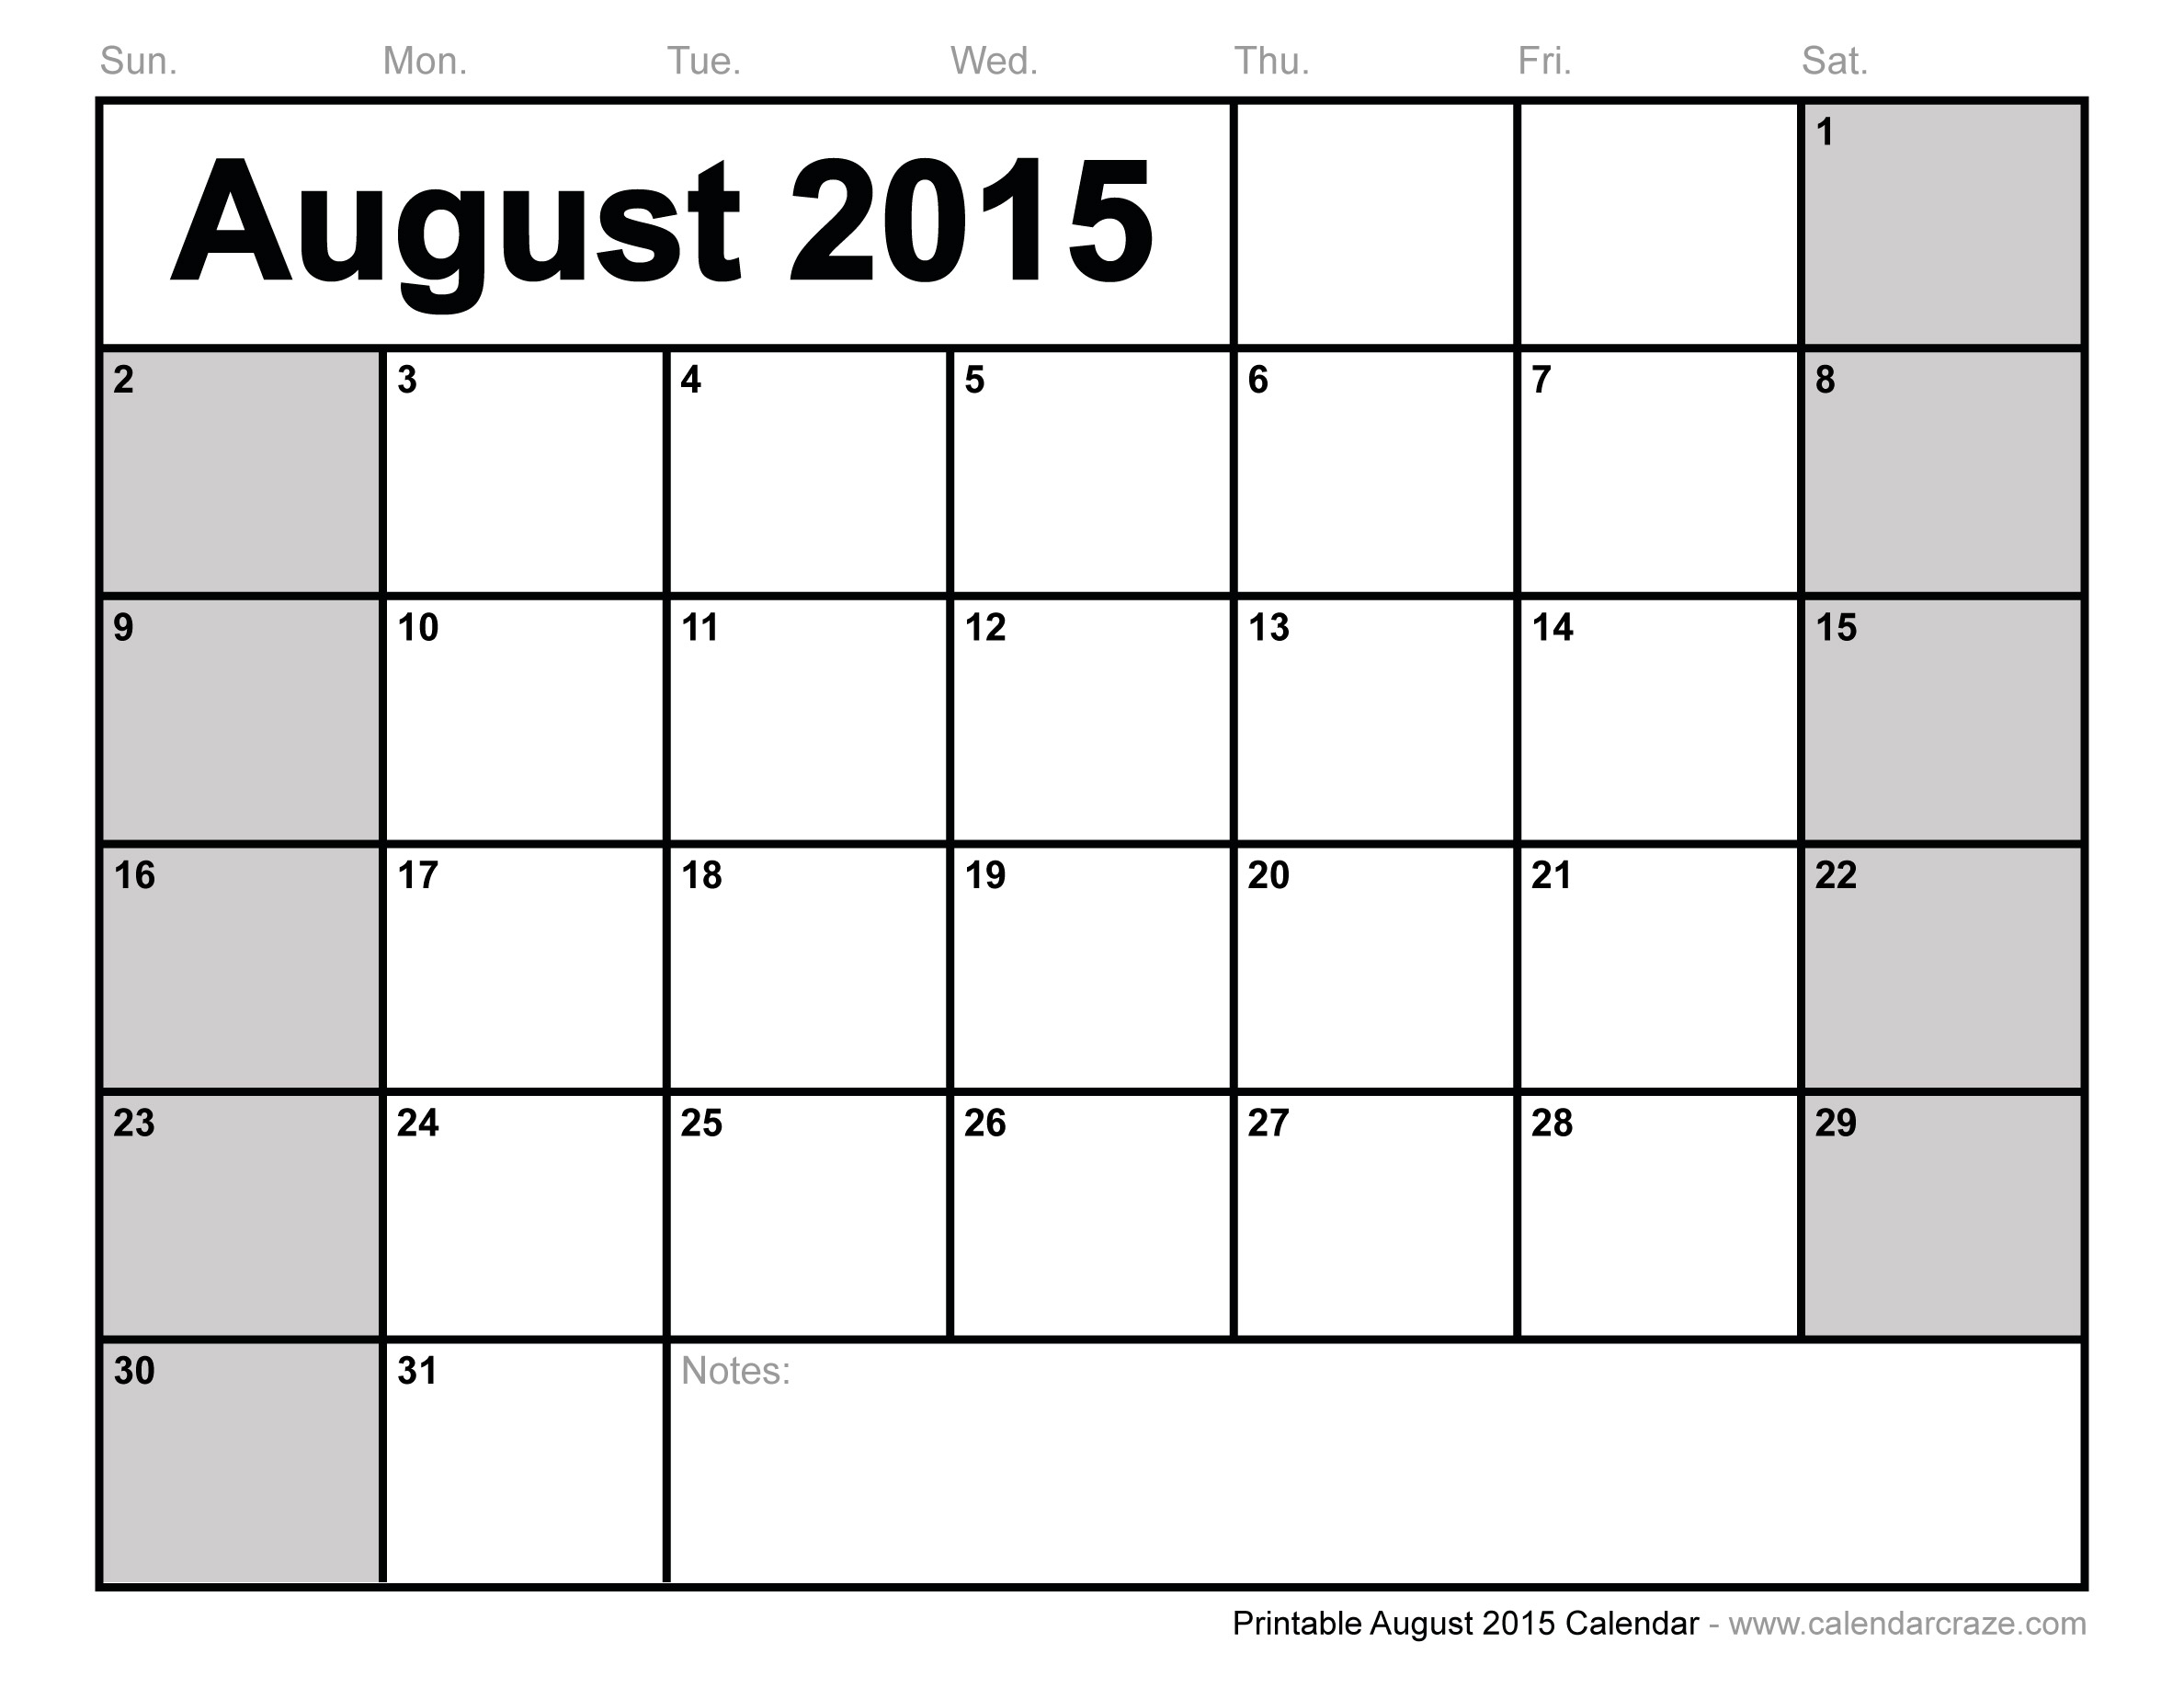 6-best-images-of-august-2015-calendar-printable-free-august-2015